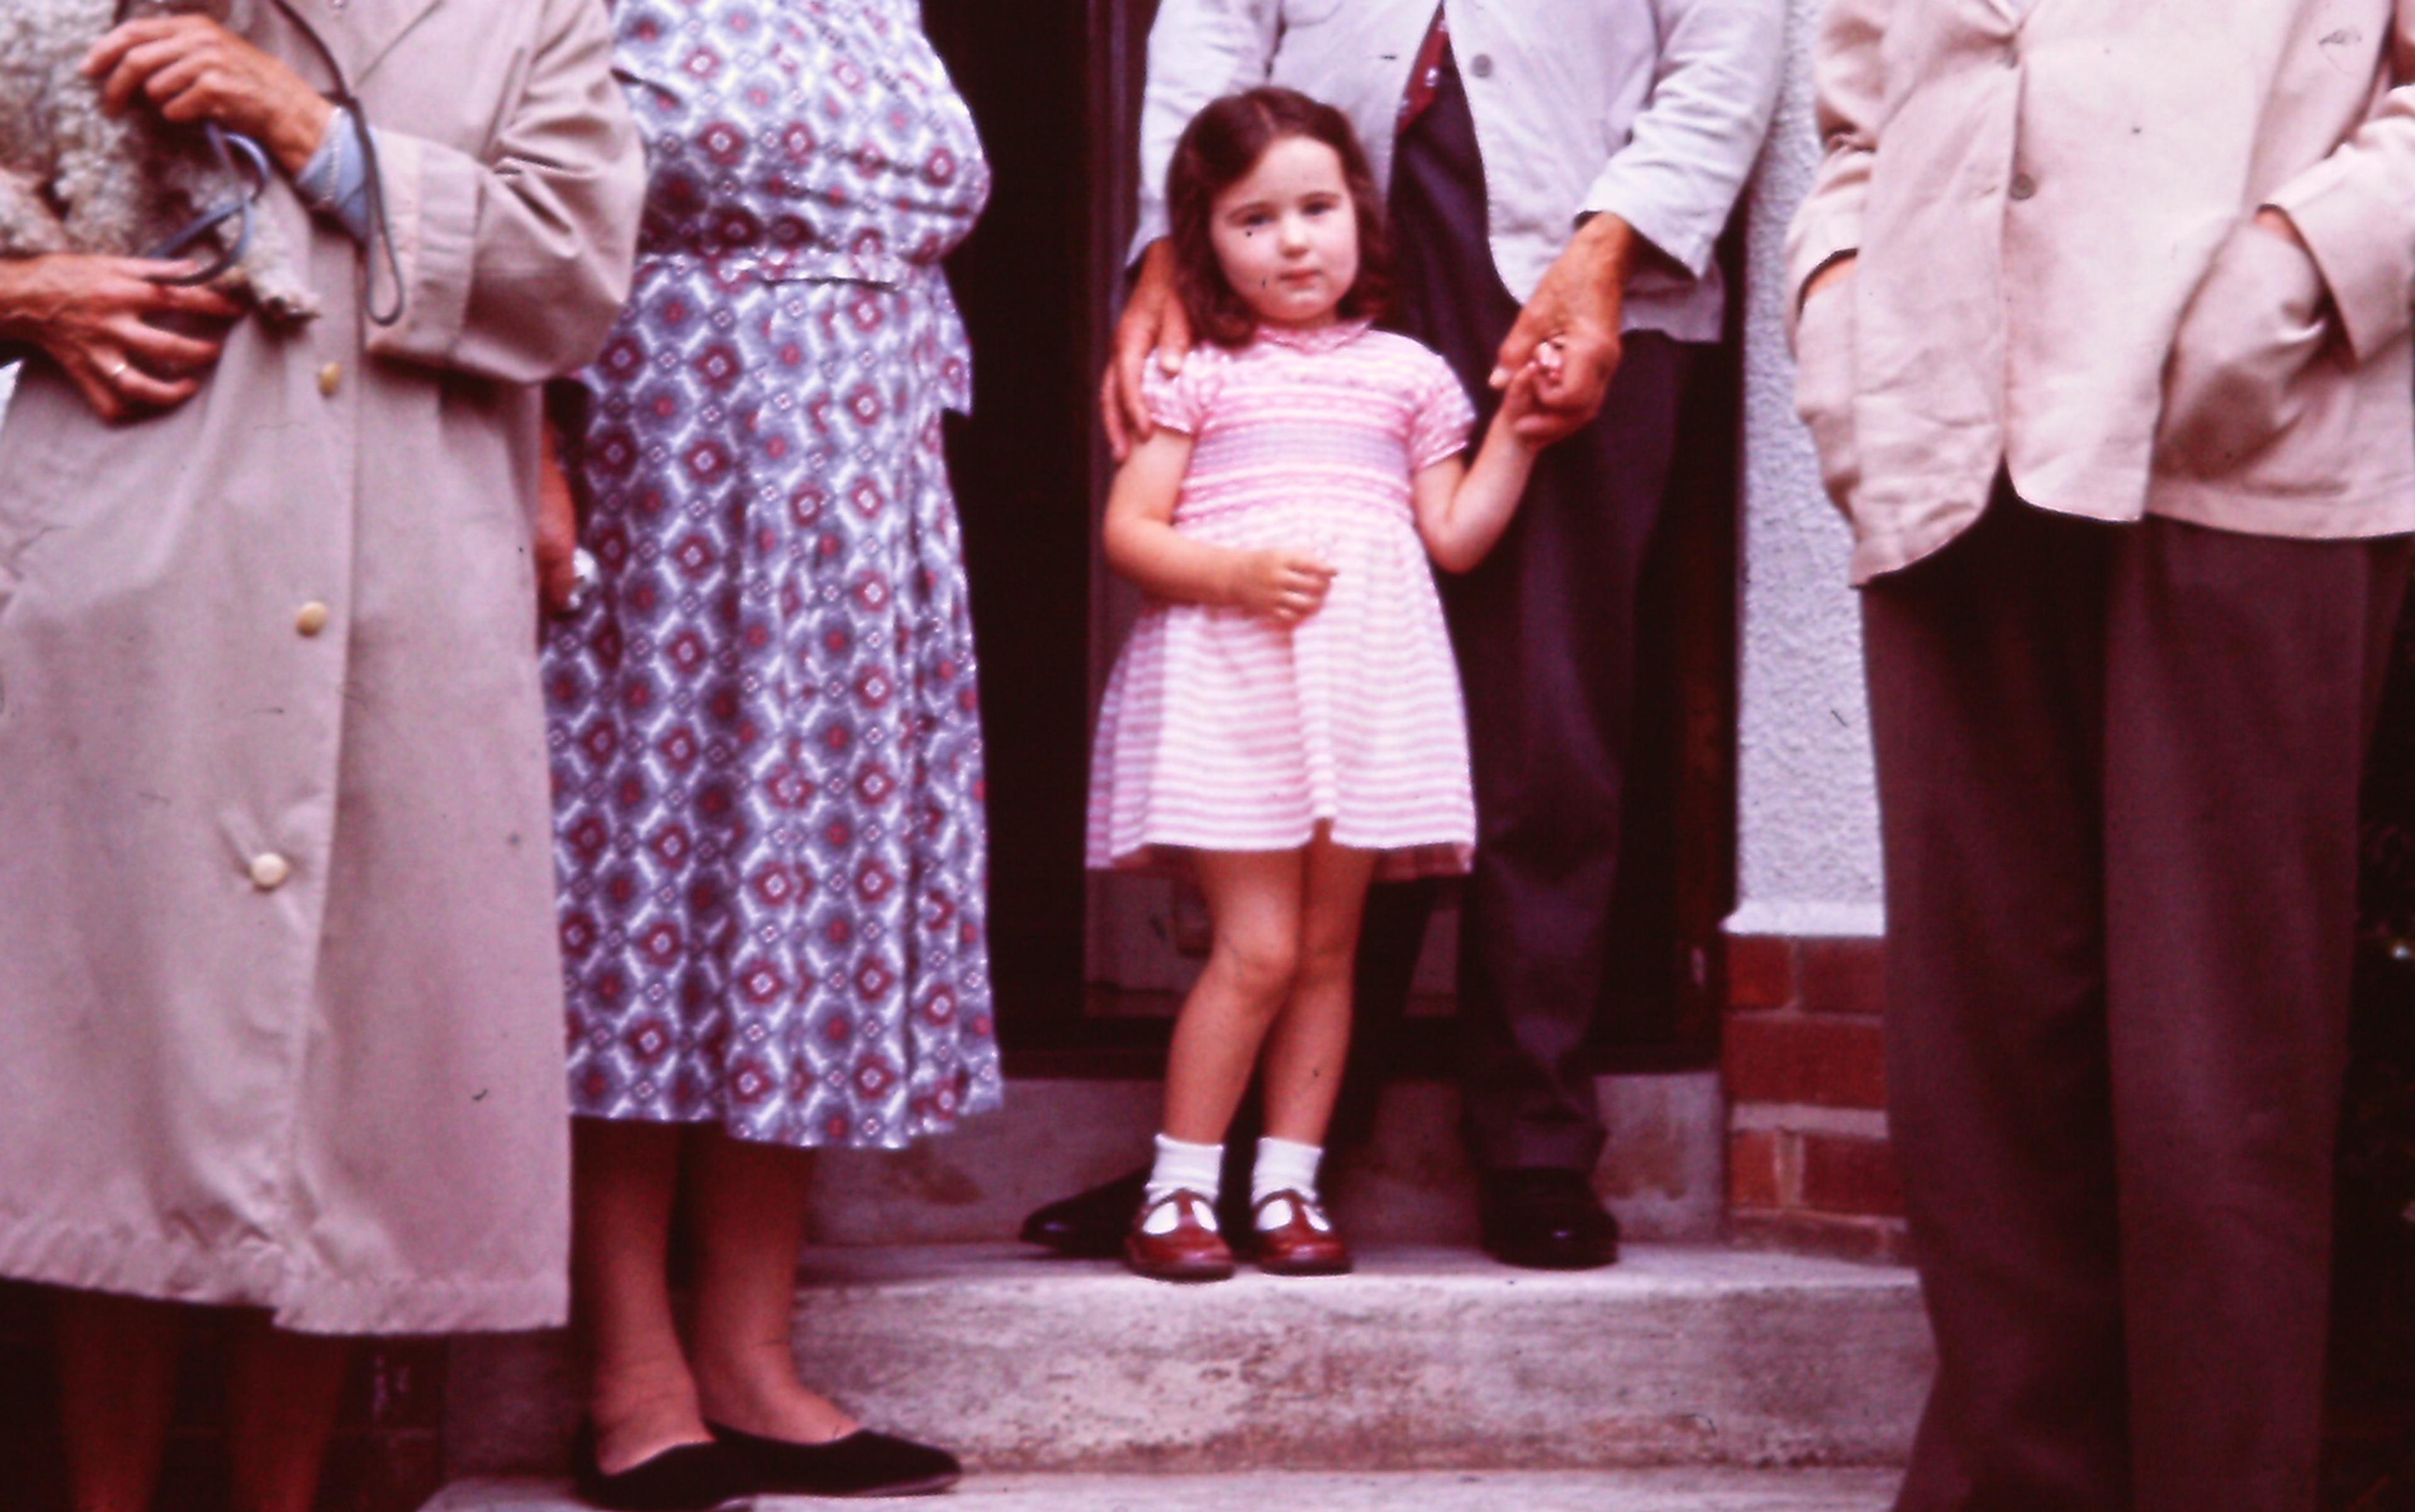 A young girl in a pink dress stands on a step, holding the hand of an adult. Four adults are partially visible around her.